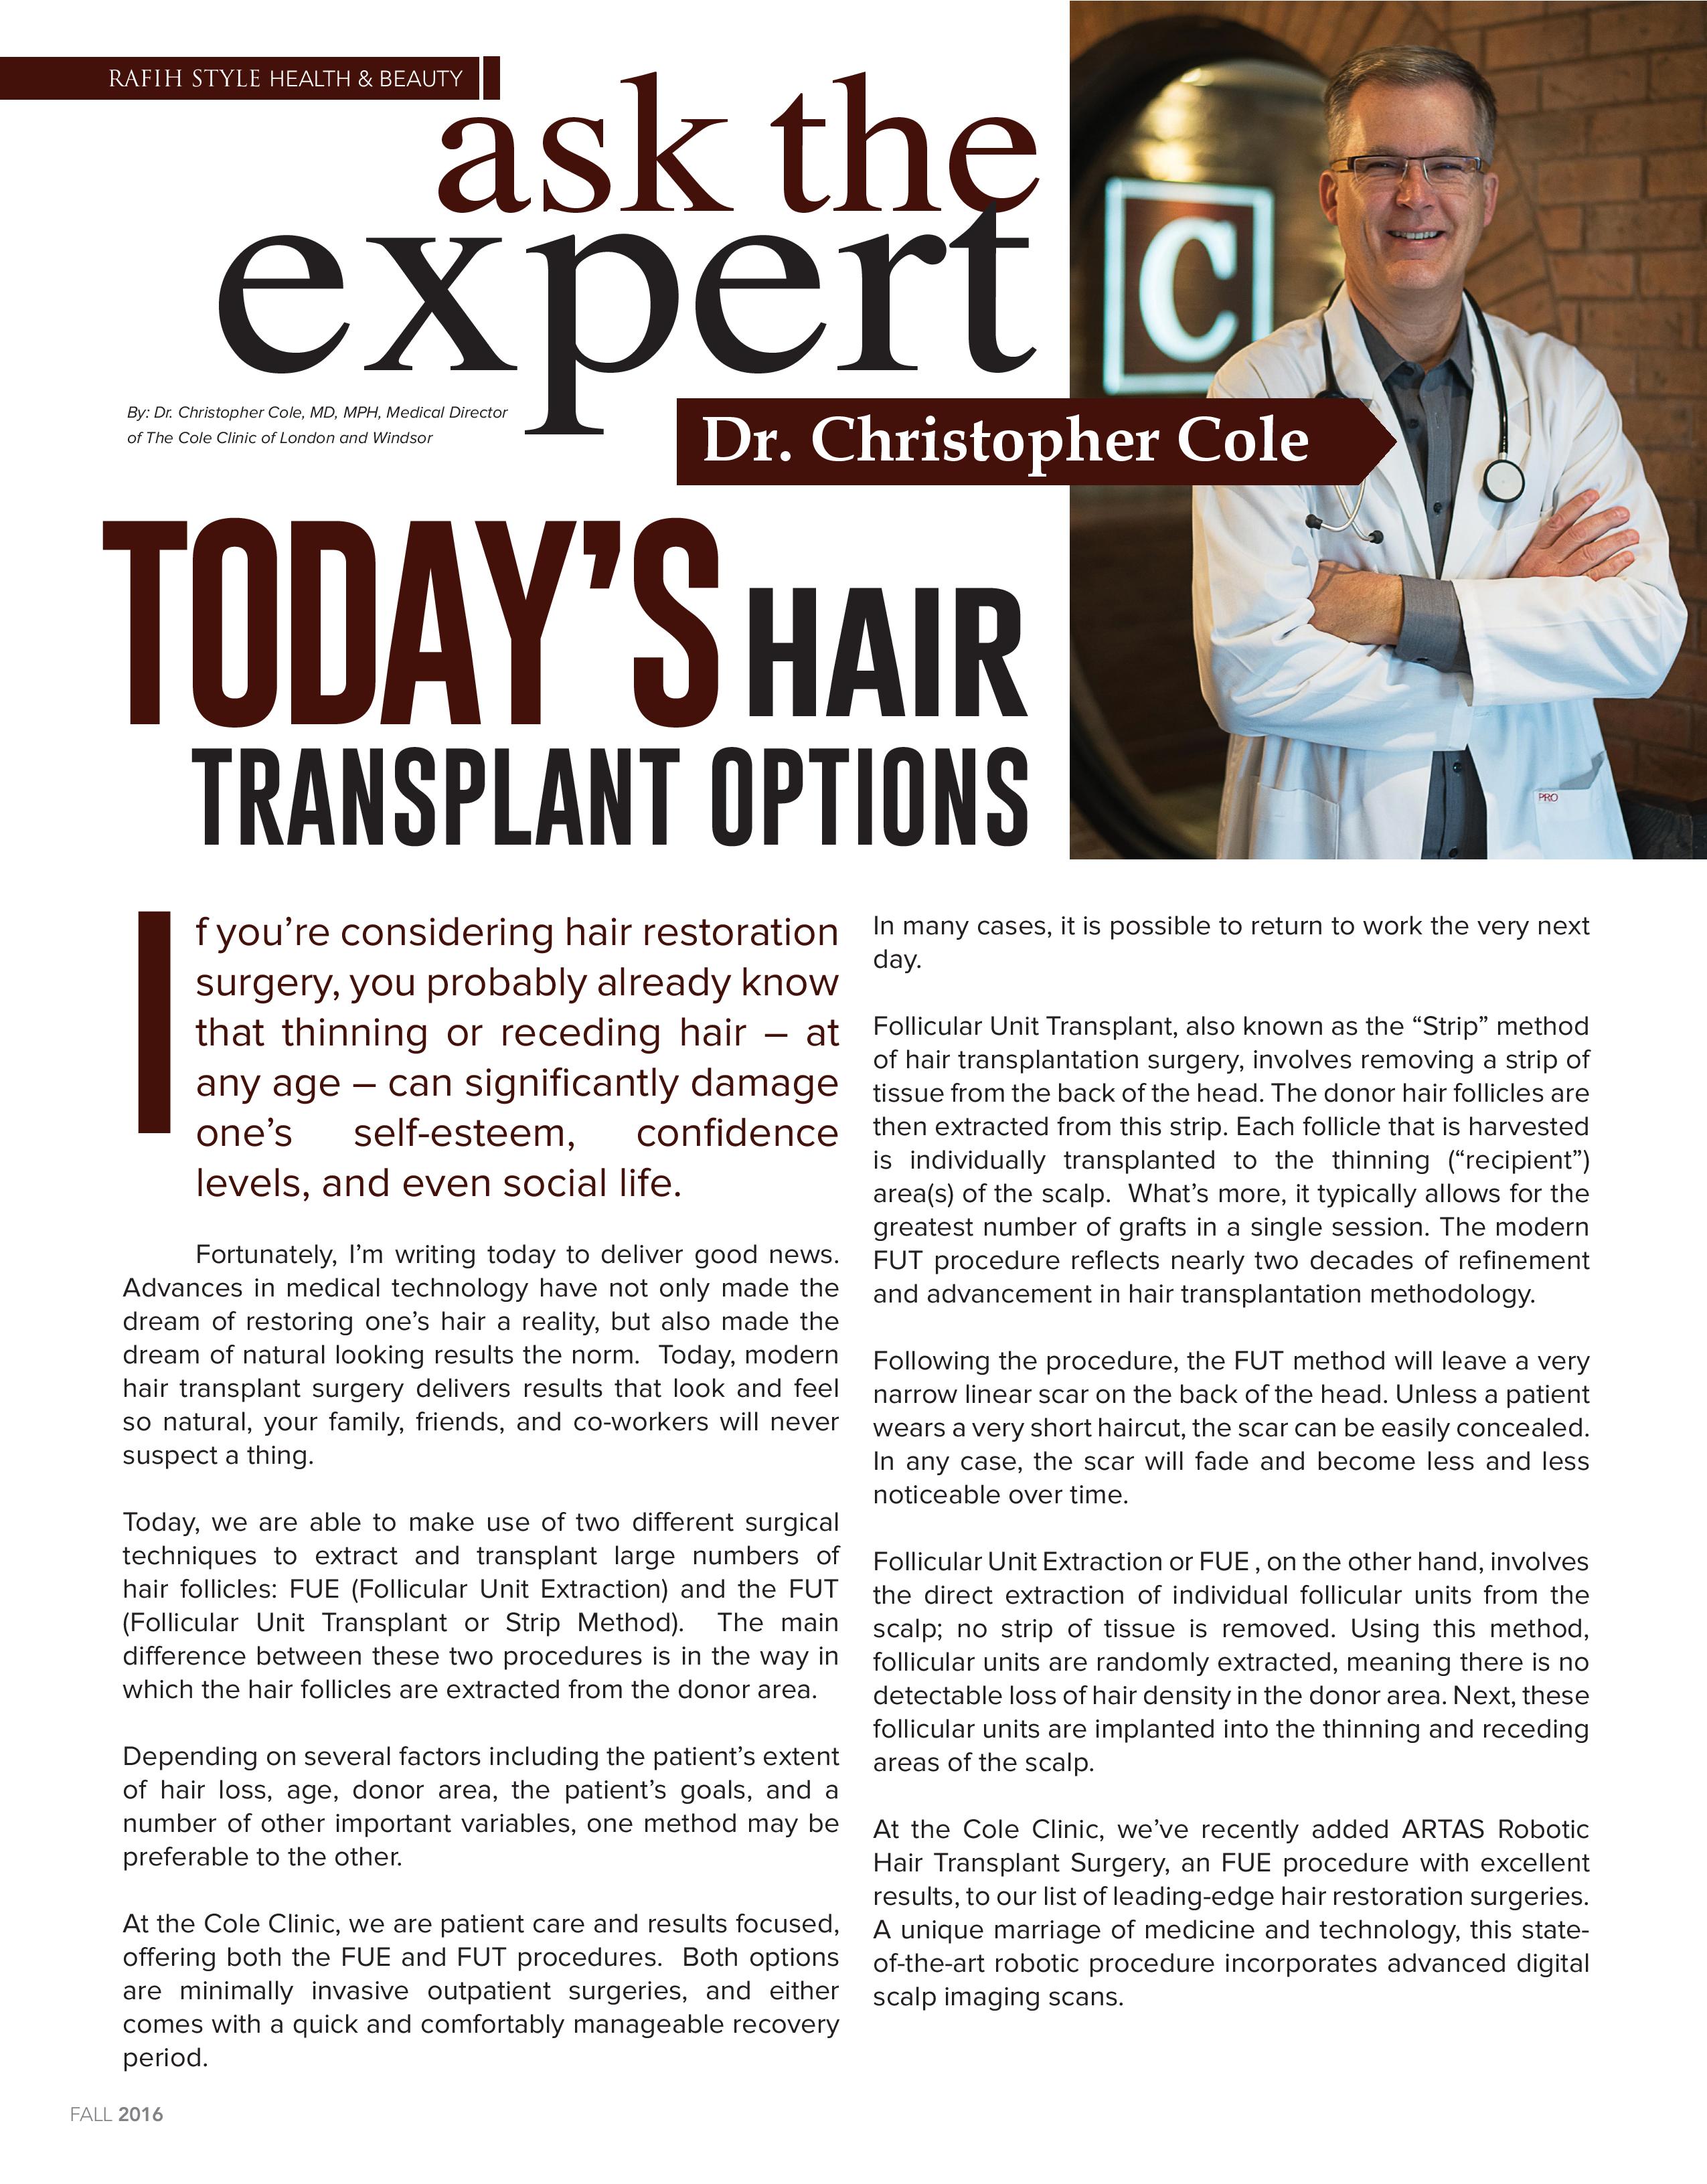 In this article Dr. Cole discusses and evaluates two minimally invasive hair transplant procedures, Follicular Unit Extraction (FUE) and the Follicular Unit Transplant (FUT). 